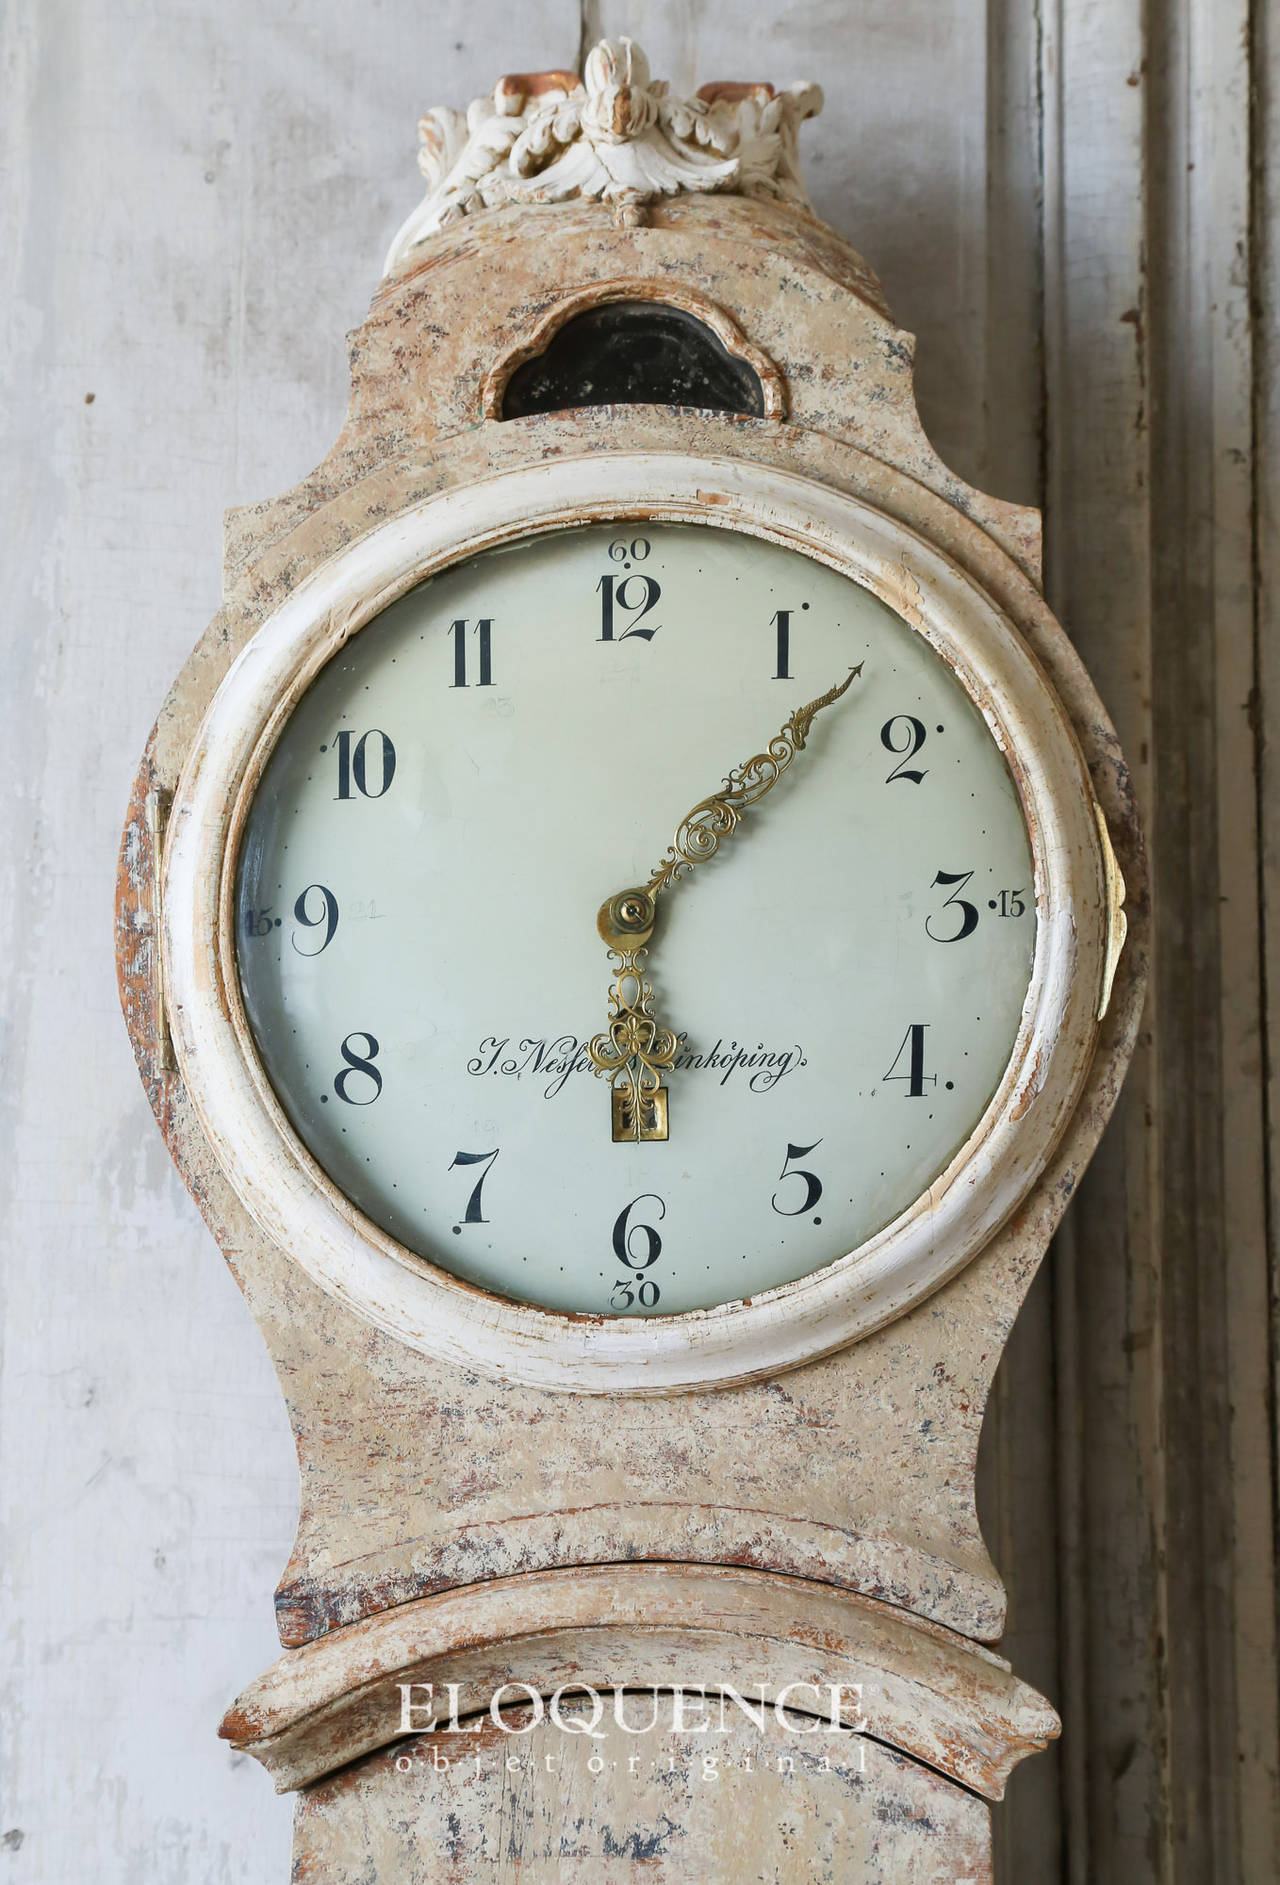 Stunning Swedish antique Rococo Mora clock in the original creamy beige with hints of charcoal and cherry toned wood peeking through. The interior of the clock is a vibrant tangerine and the tiniest bit of dark periwinkle. The floral carvings are a